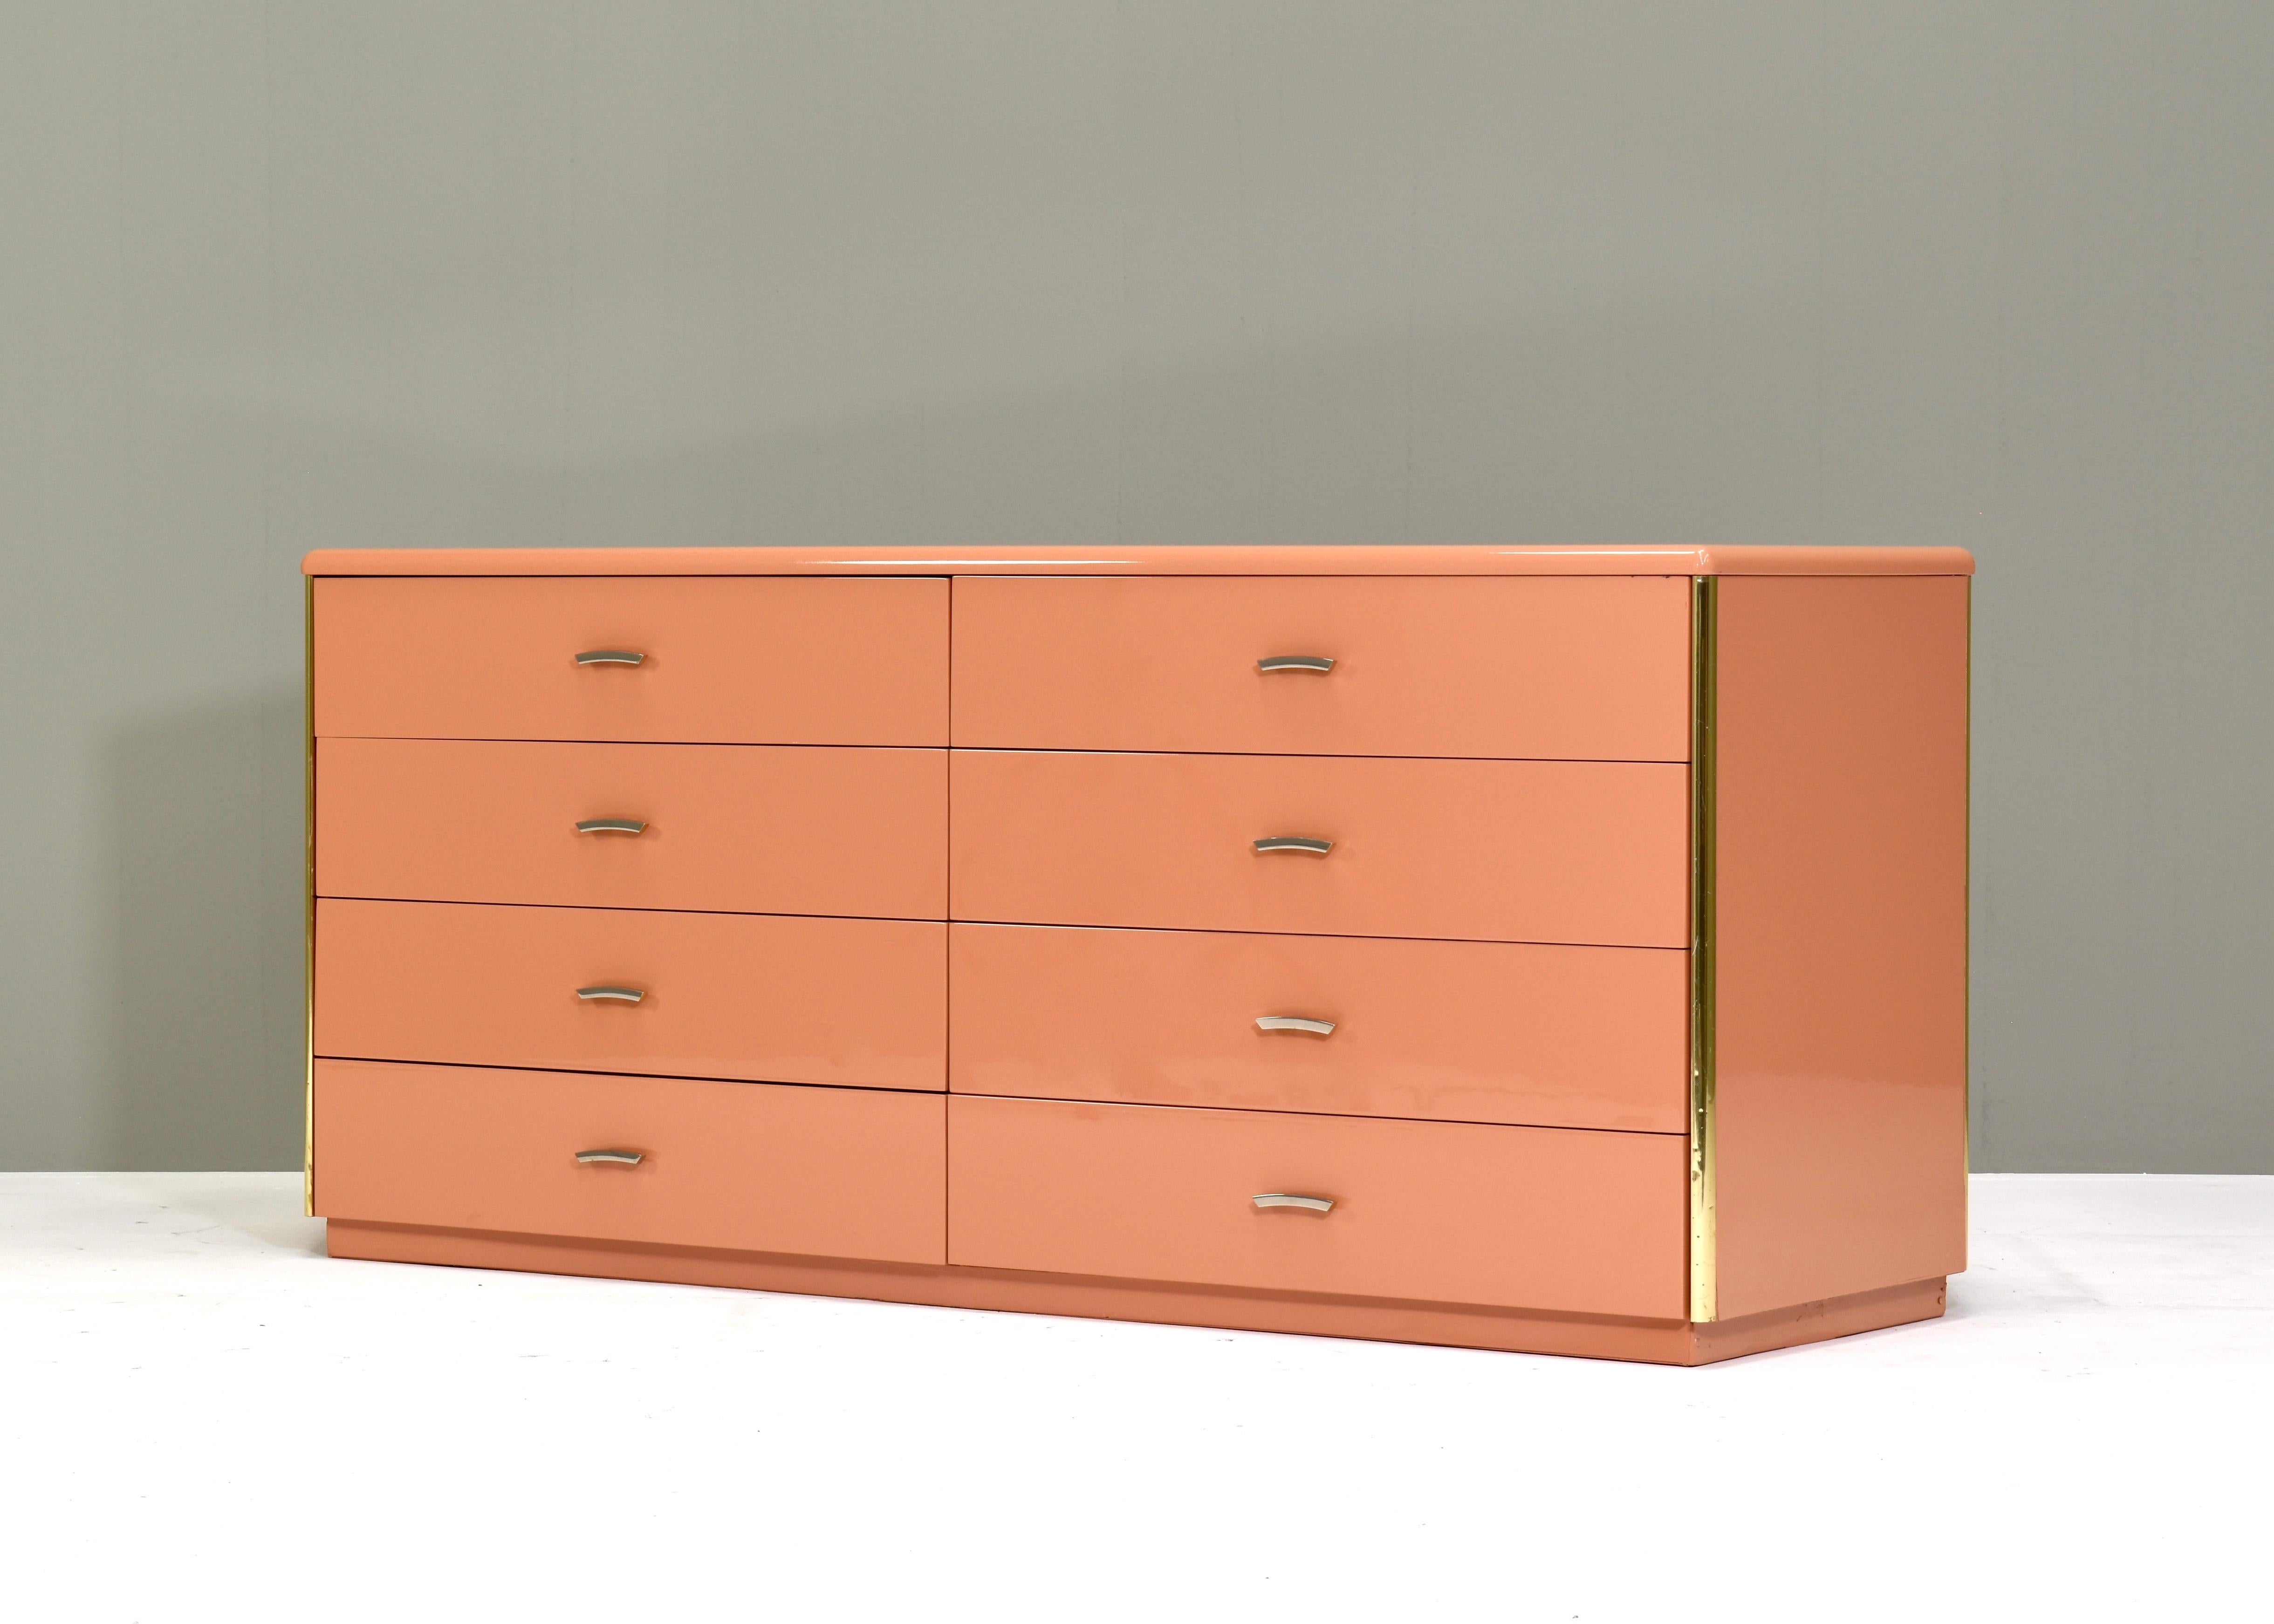 Designer: unknown

Amazing sideboard / credenza with eight drawers and brass details. The sideboard has been professionally repainted by the previous owners in a Flamingo pink high gloss lacquer.
Italy – circa 1970

Manufacturer: Unknown
Size